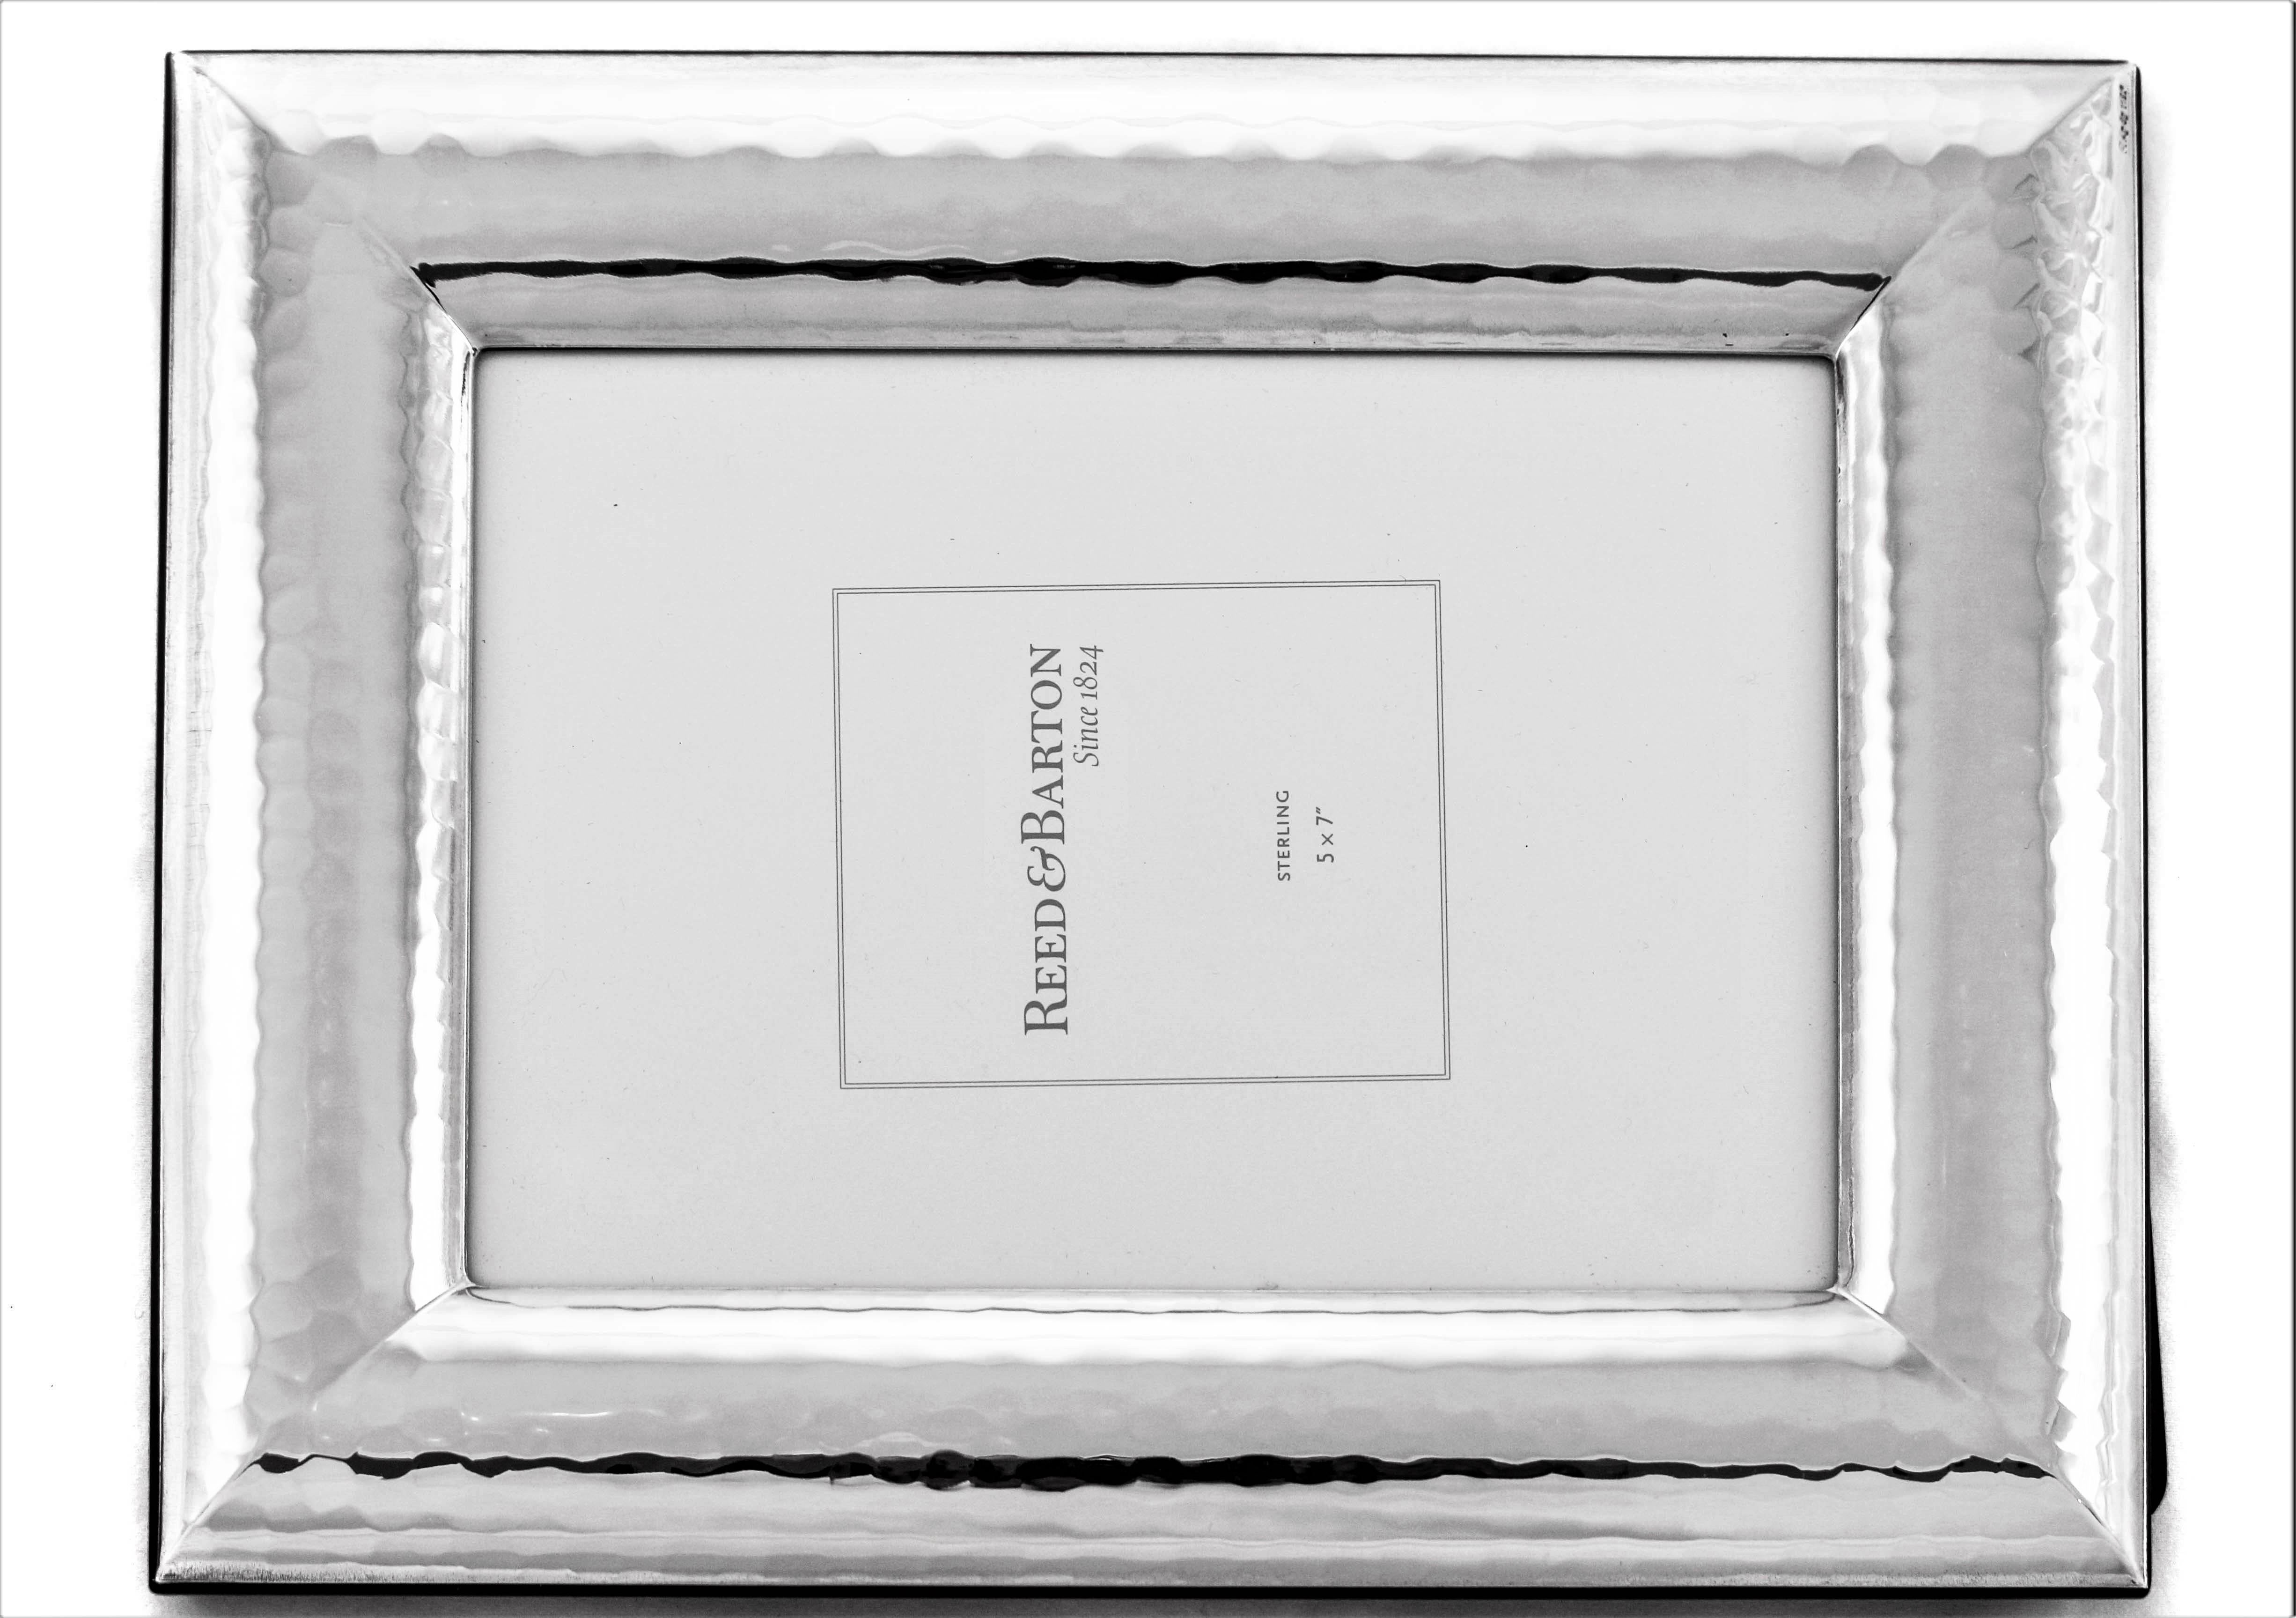 Love sterling frames but hate polishing them? No worries, these picture frames are tarnish resistant and will stay looking gorgeous. A modern hammered motif looks great in any room or decor. Photos are the nicest way to personalize a room. This